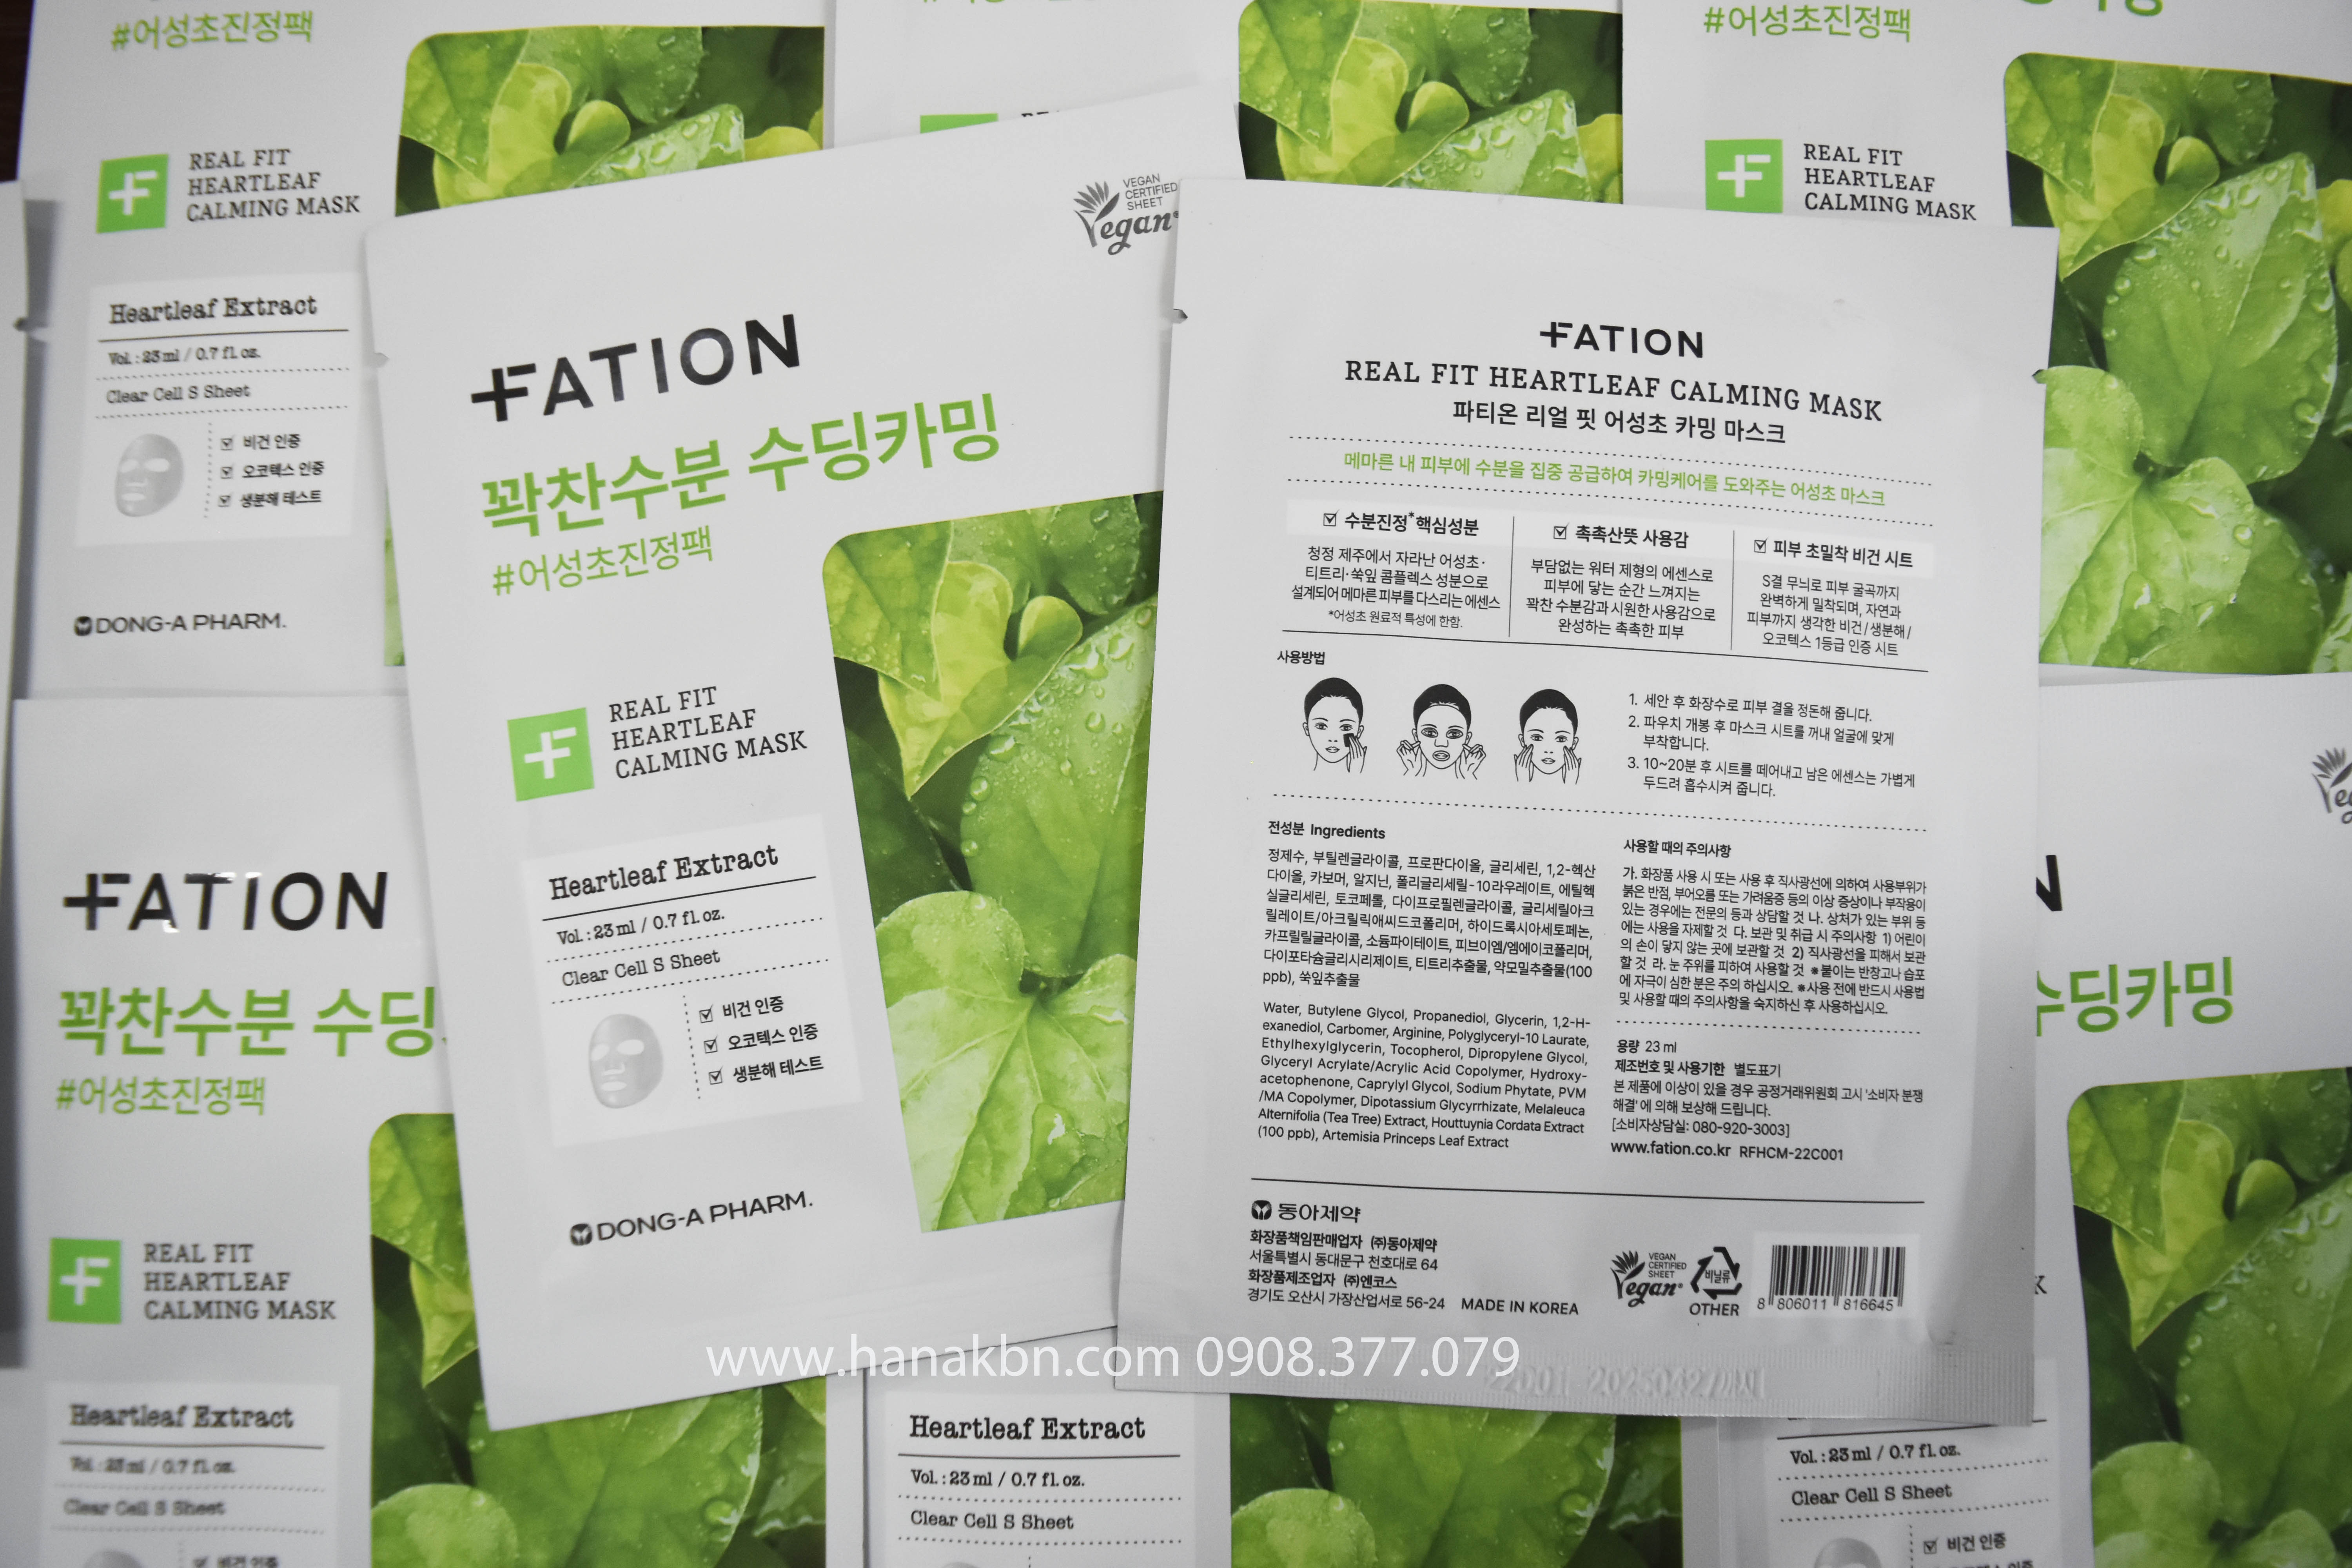 Mặt nạ Fation Real Fix Heartleaf Calming Mask